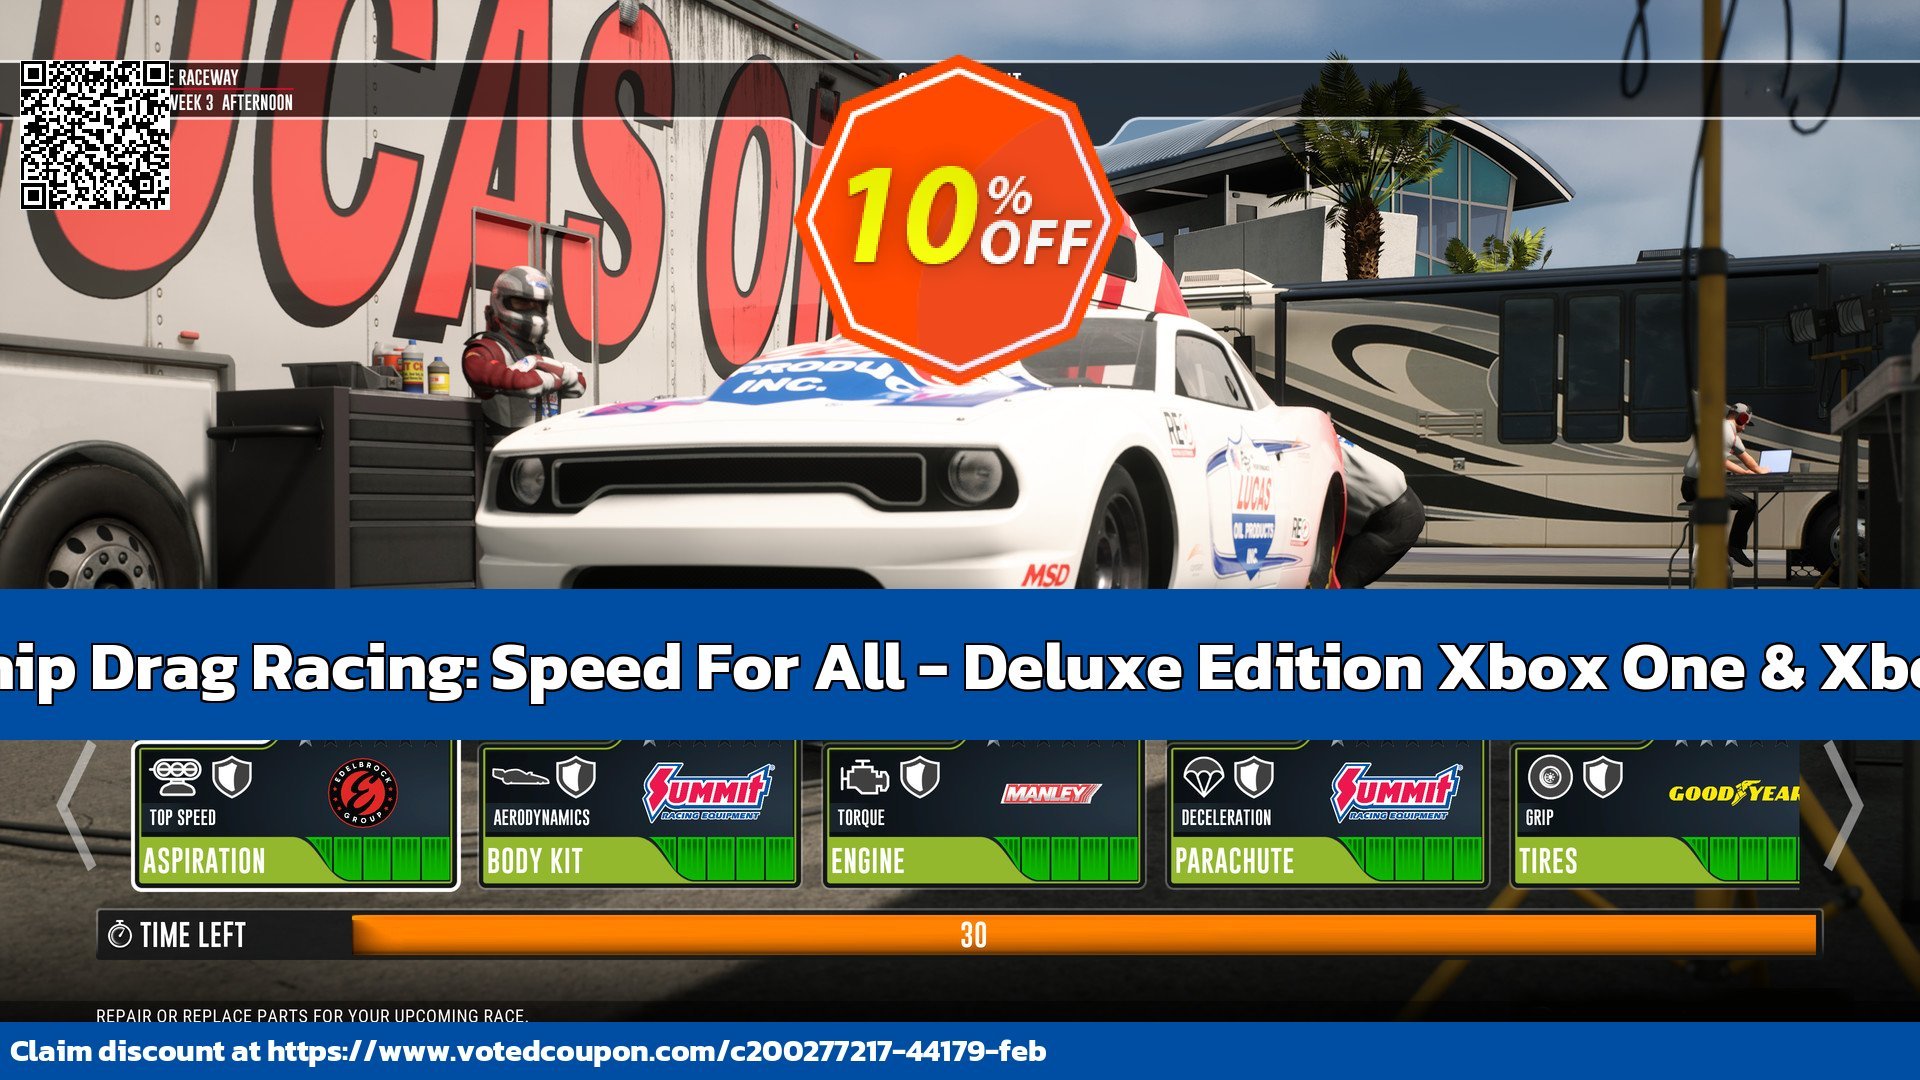 NHRA Championship Drag Racing: Speed For All - Deluxe Edition Xbox One & Xbox Series X|S, WW  voted-on promotion codes